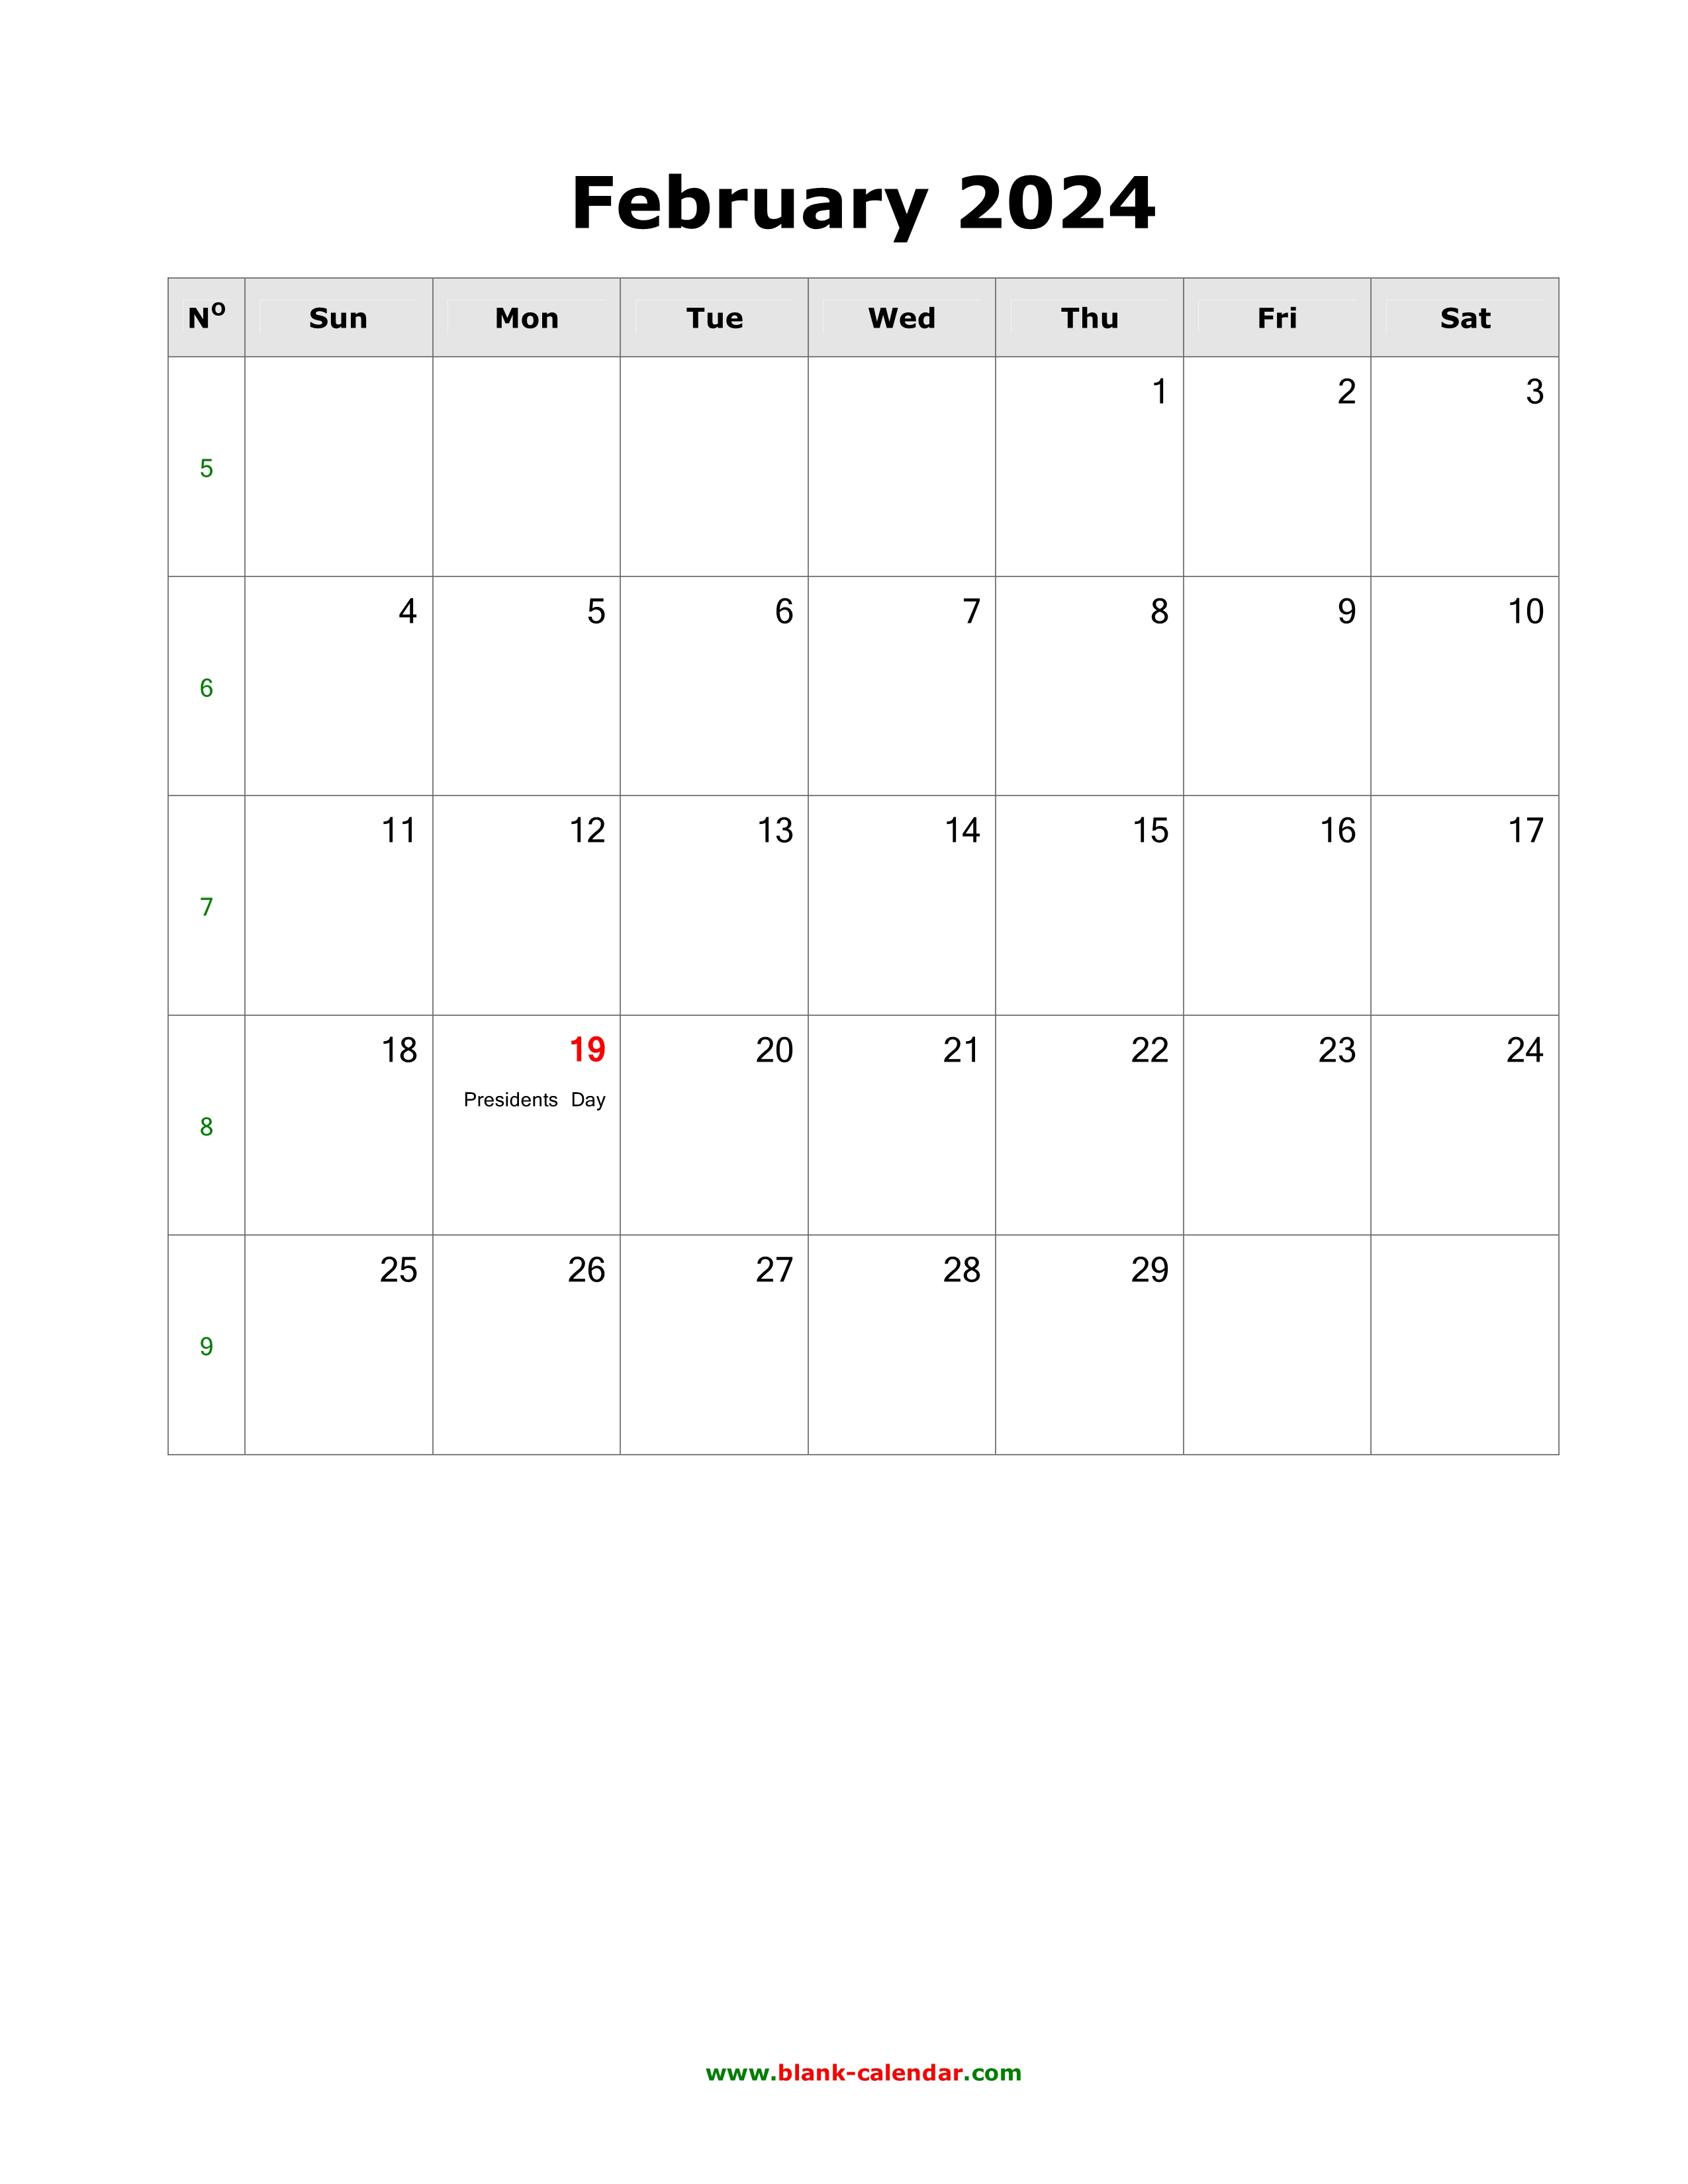 Download February 2024 Blank Calendar with US Holidays (vertical)